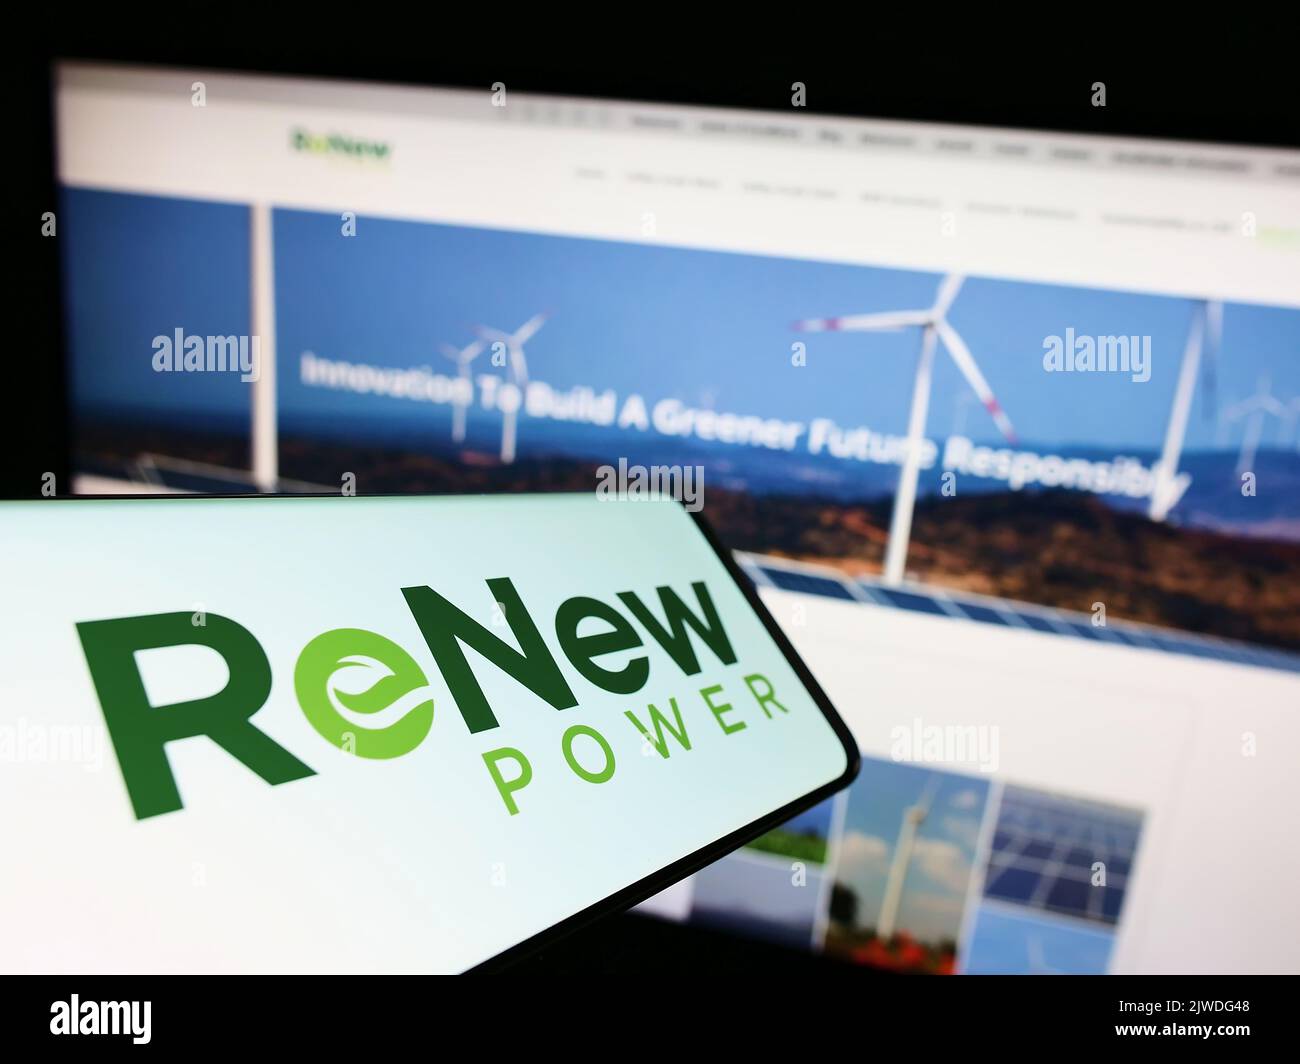 Mobile phone with logo of Indian company ReNew Energy Global plc on screen in front of business website. Focus on center-right of phone display. Stock Photo